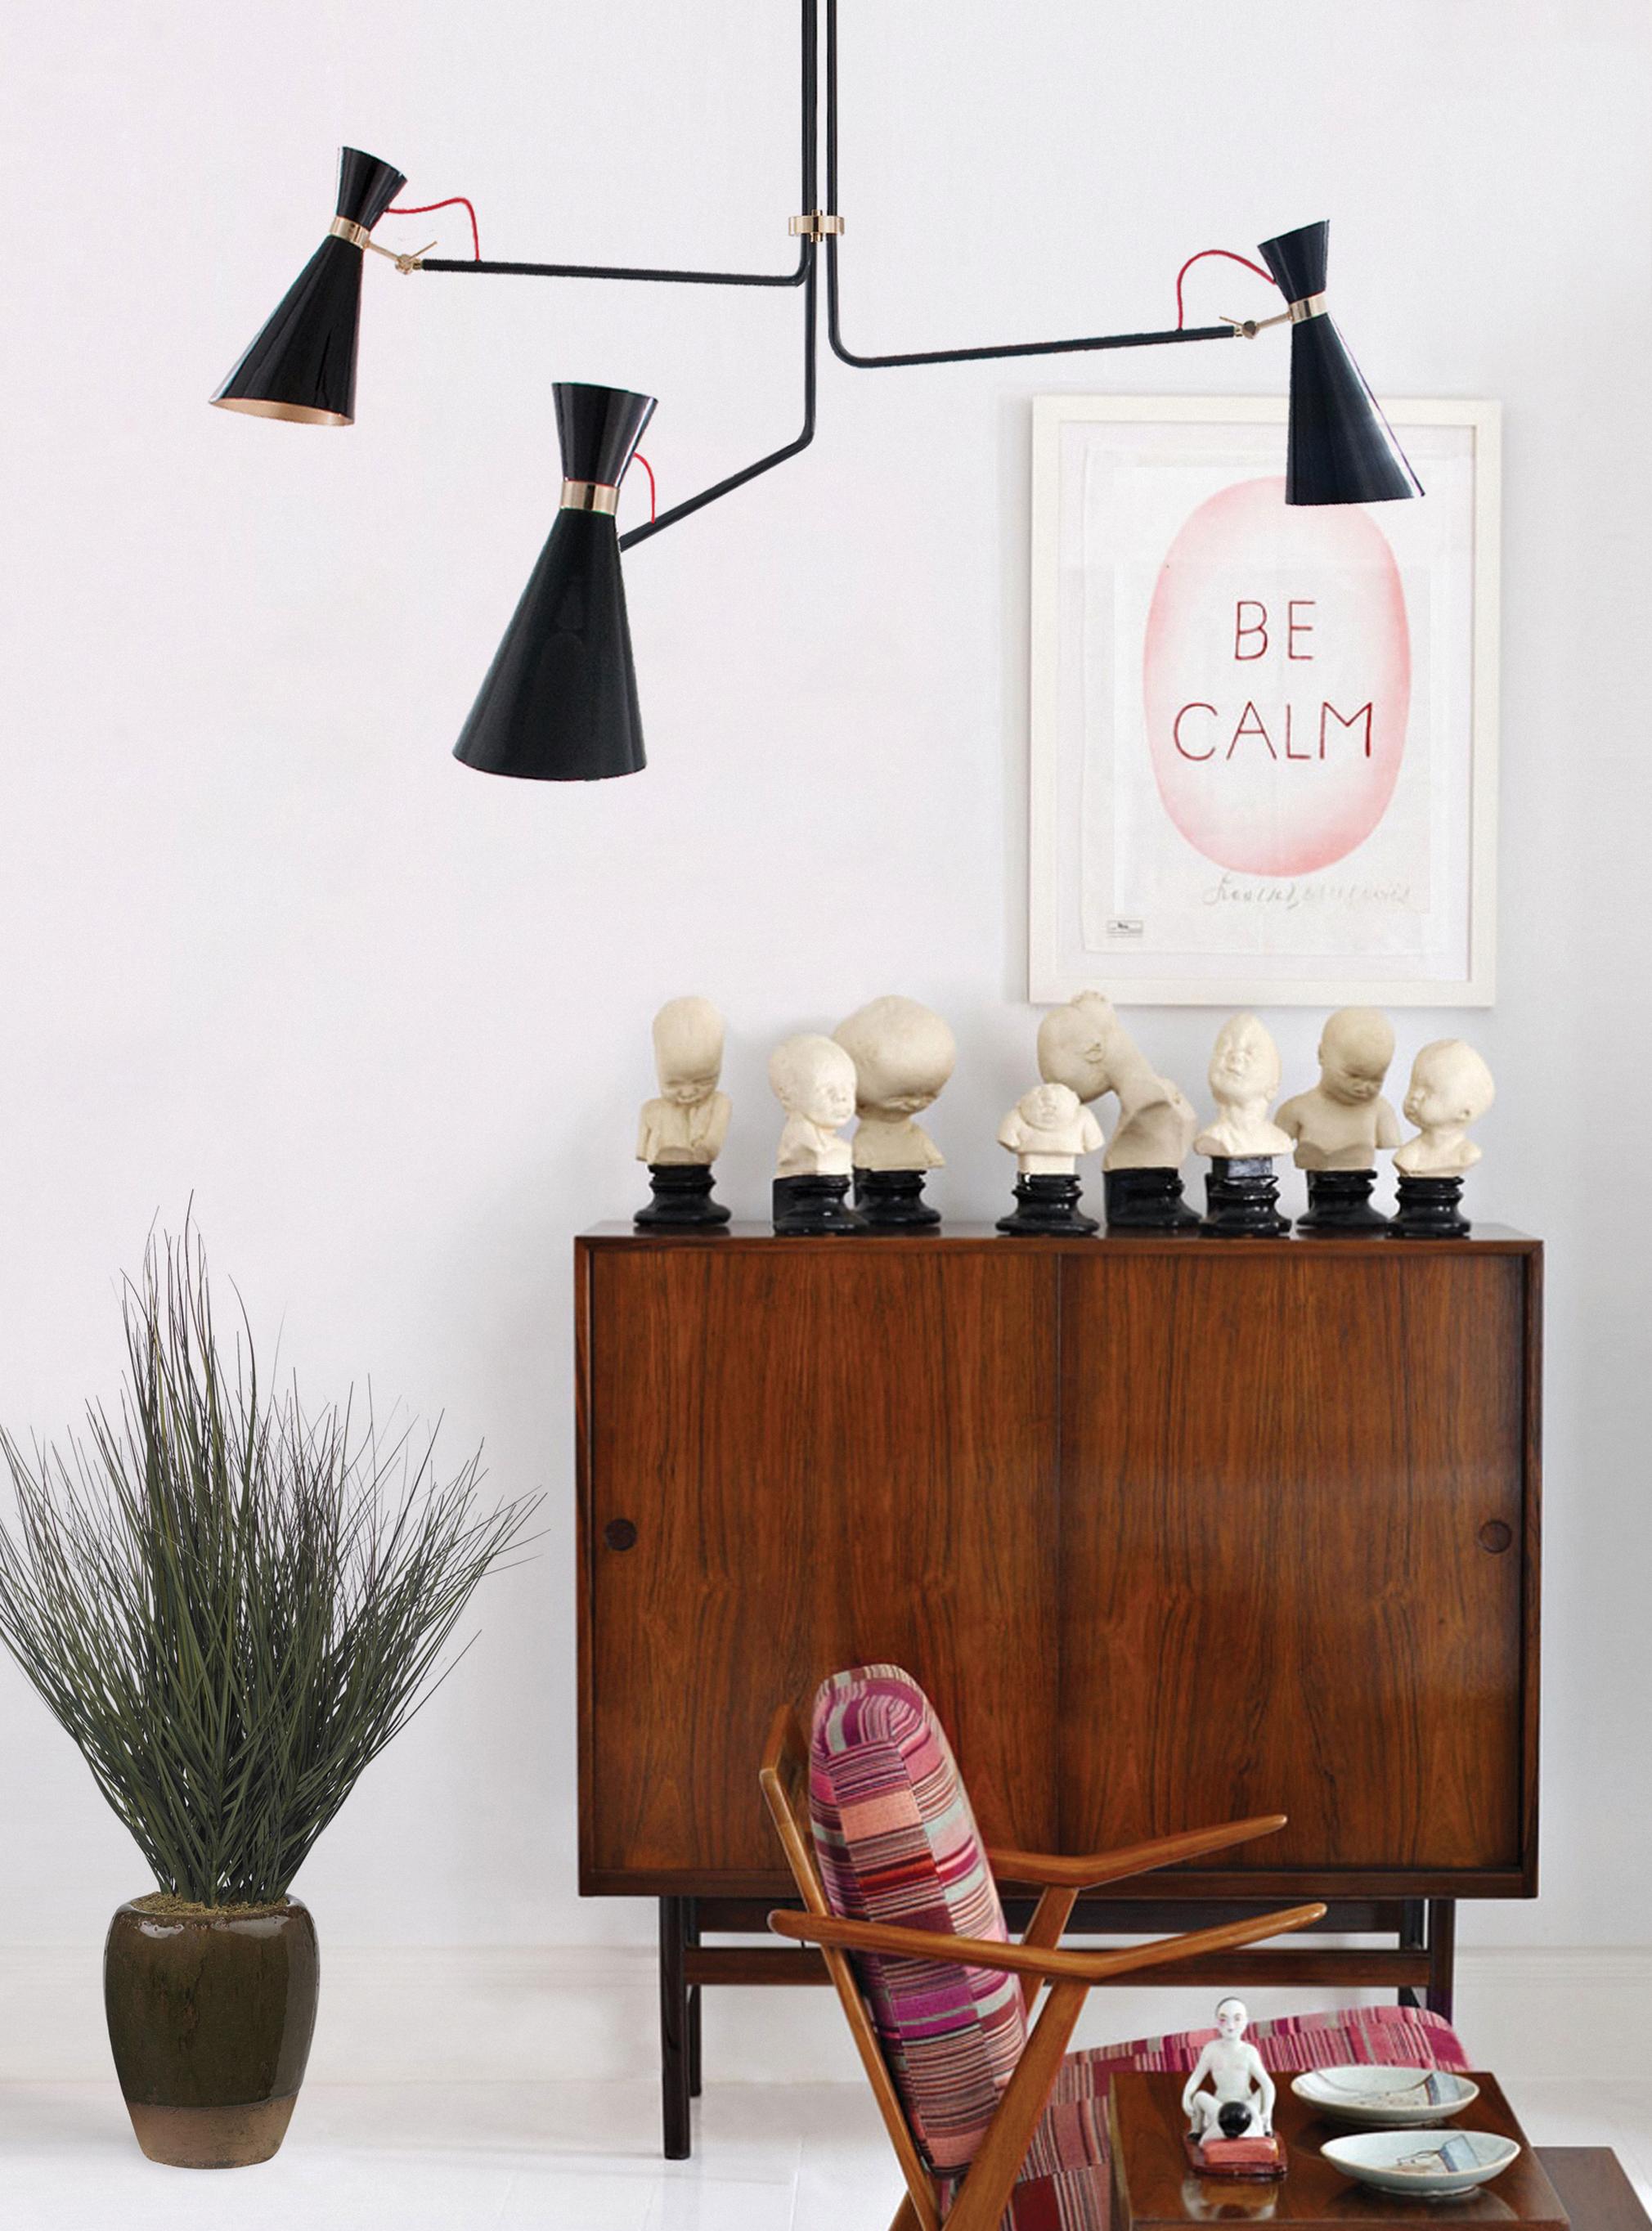 Nina Simone was the inspiration for this dazzling Mid-Century Modern chandelier. Handmade in brass, this modern lamp has three lamp shades in aluminum that feature a glossy black finish and three visible textile red wires above the large lamp